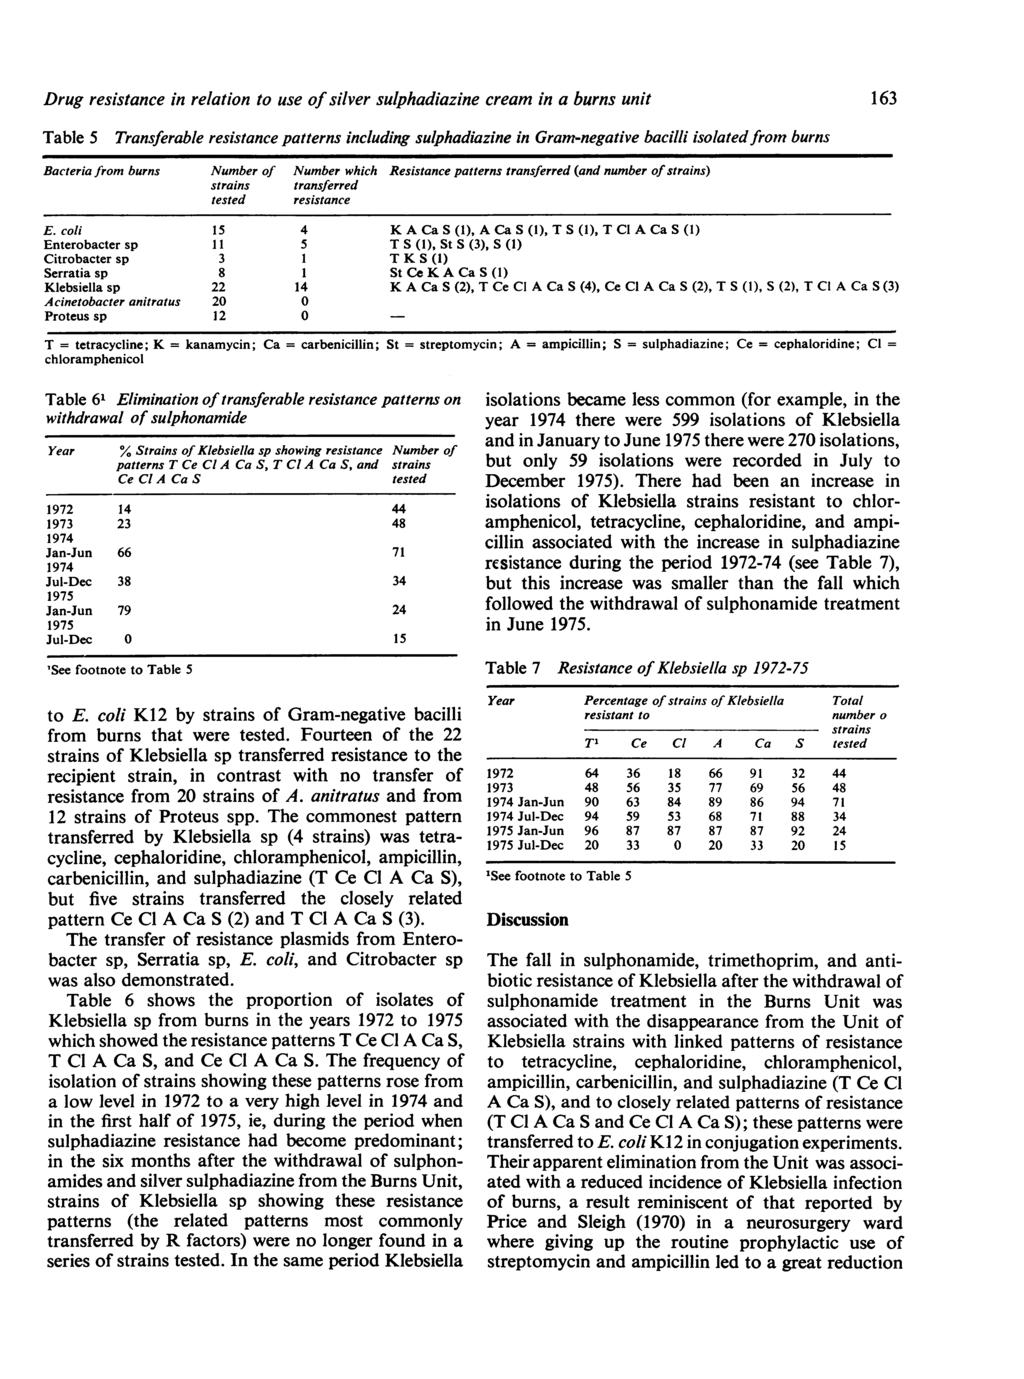 Drug resistance in relation to use of silver sulphadiazine cream in a burns unit Table 5 Transferable resistance patterns including sulphadiazine in Gram-negative bacilli isolated from burns Bacteria